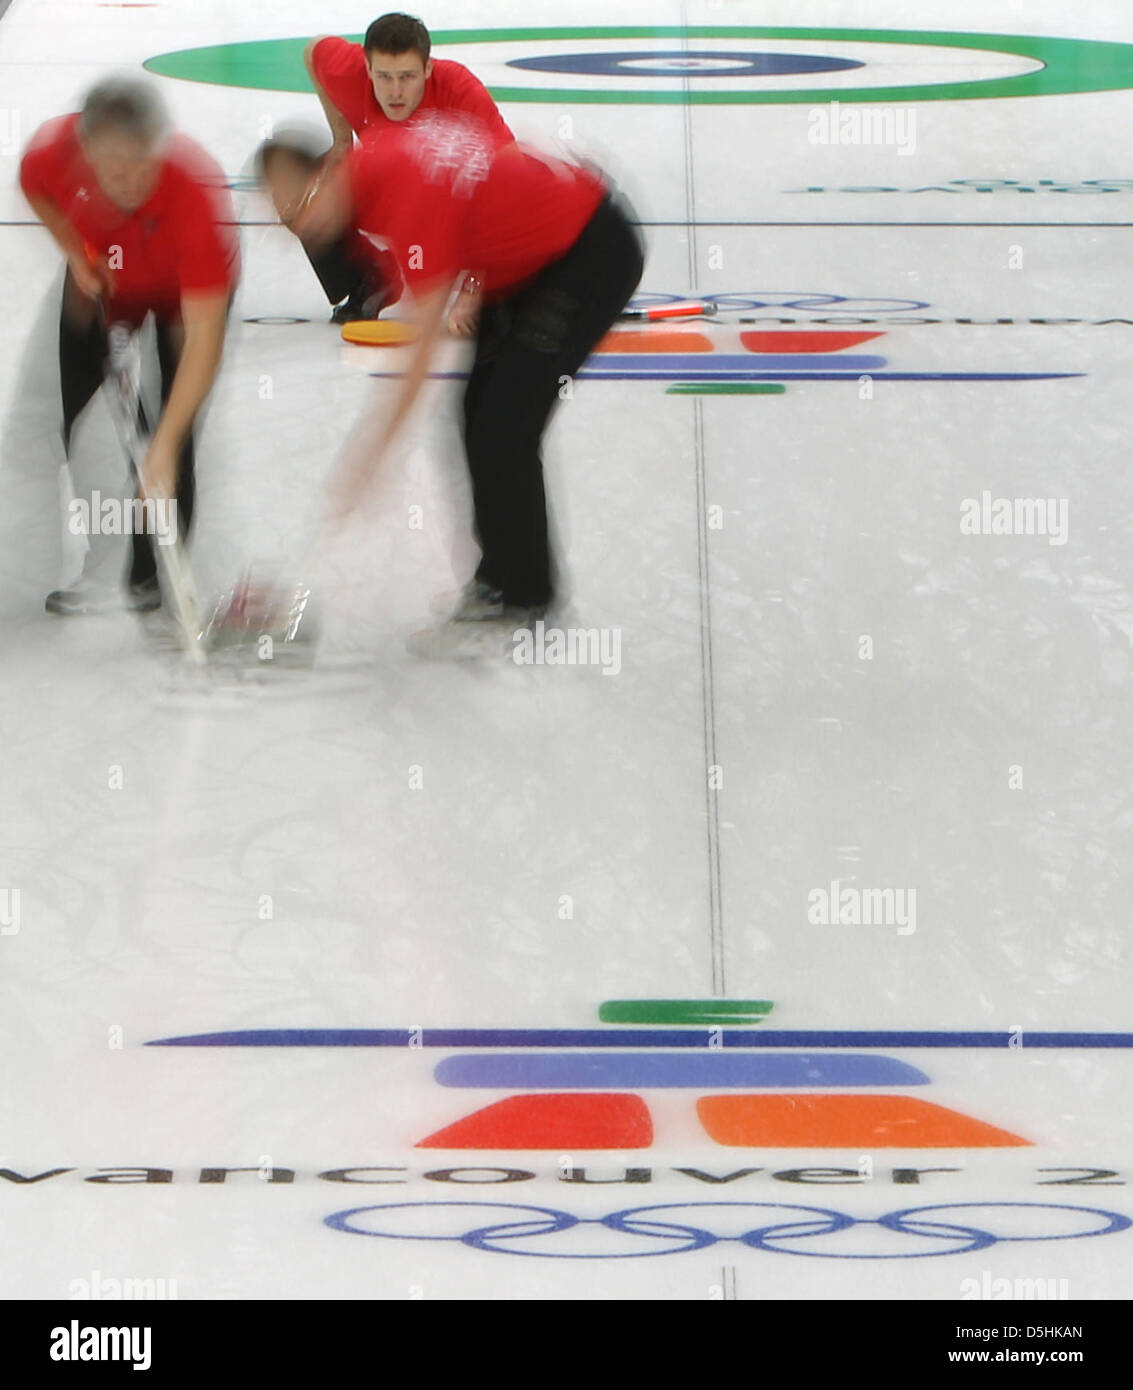 Andy Lang (M) of Germany releases his stone as Andreas Kempf (L) and Holger Hoehne guide it during Curling men's round robin session 3 at the Olympic Center during the Vancouver 2010 Olympic Games in Vancouver, Canada 17 February 2010. Germany's opponent was Sweden. Photo: Daniel Karmann Stock Photo